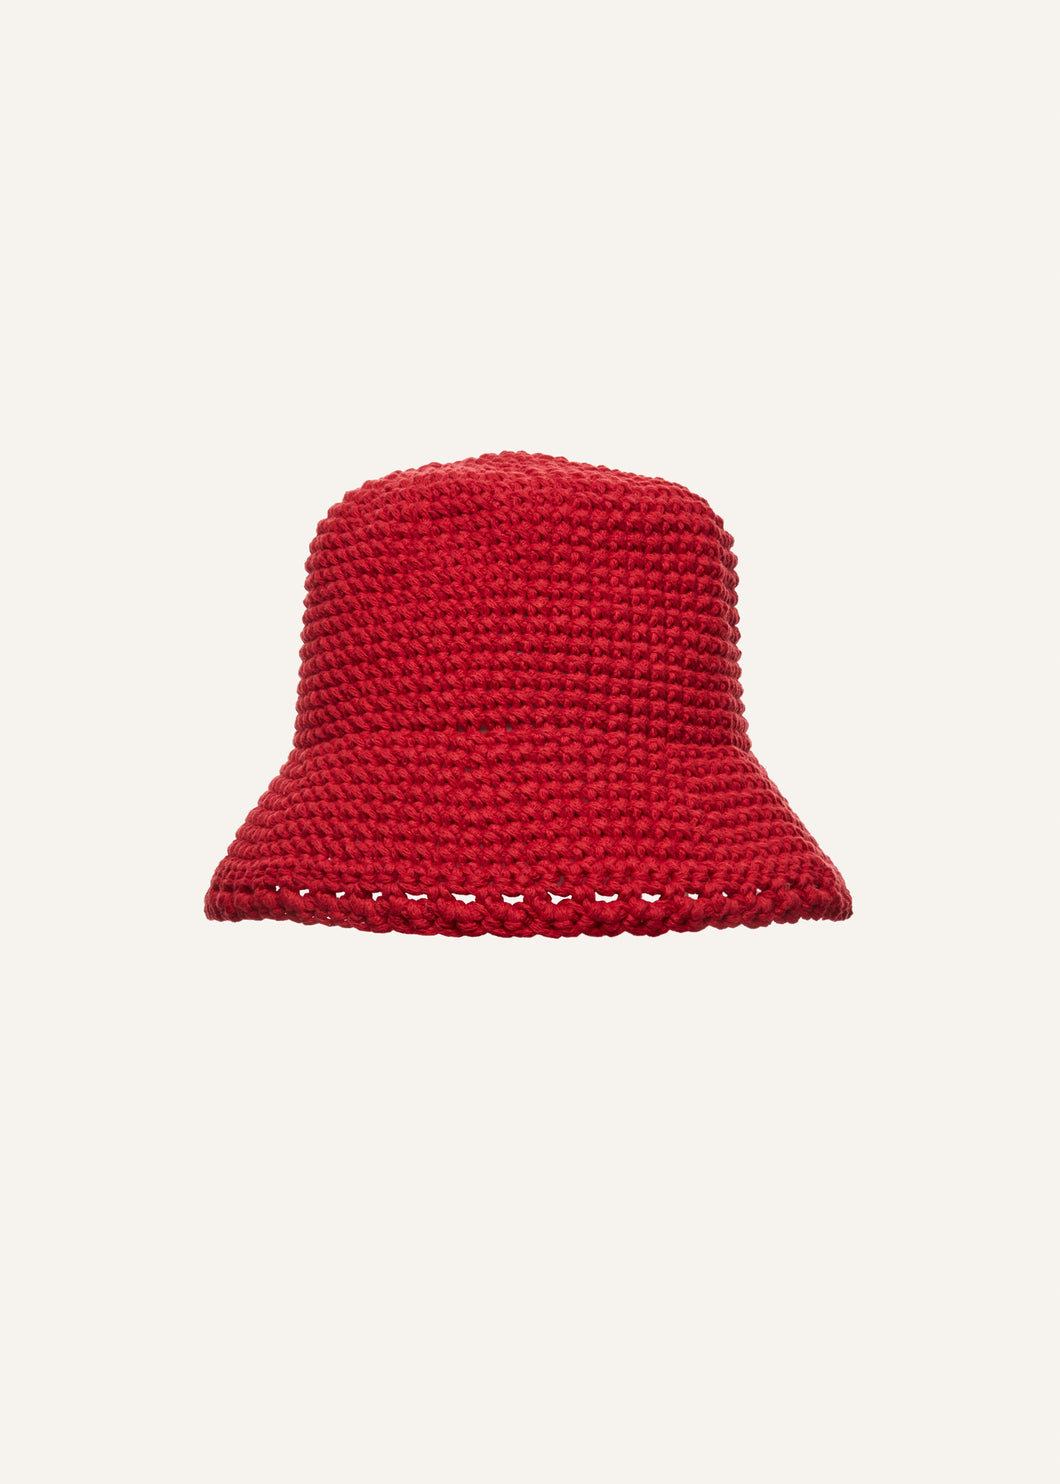 SS22 HAT 01 RED